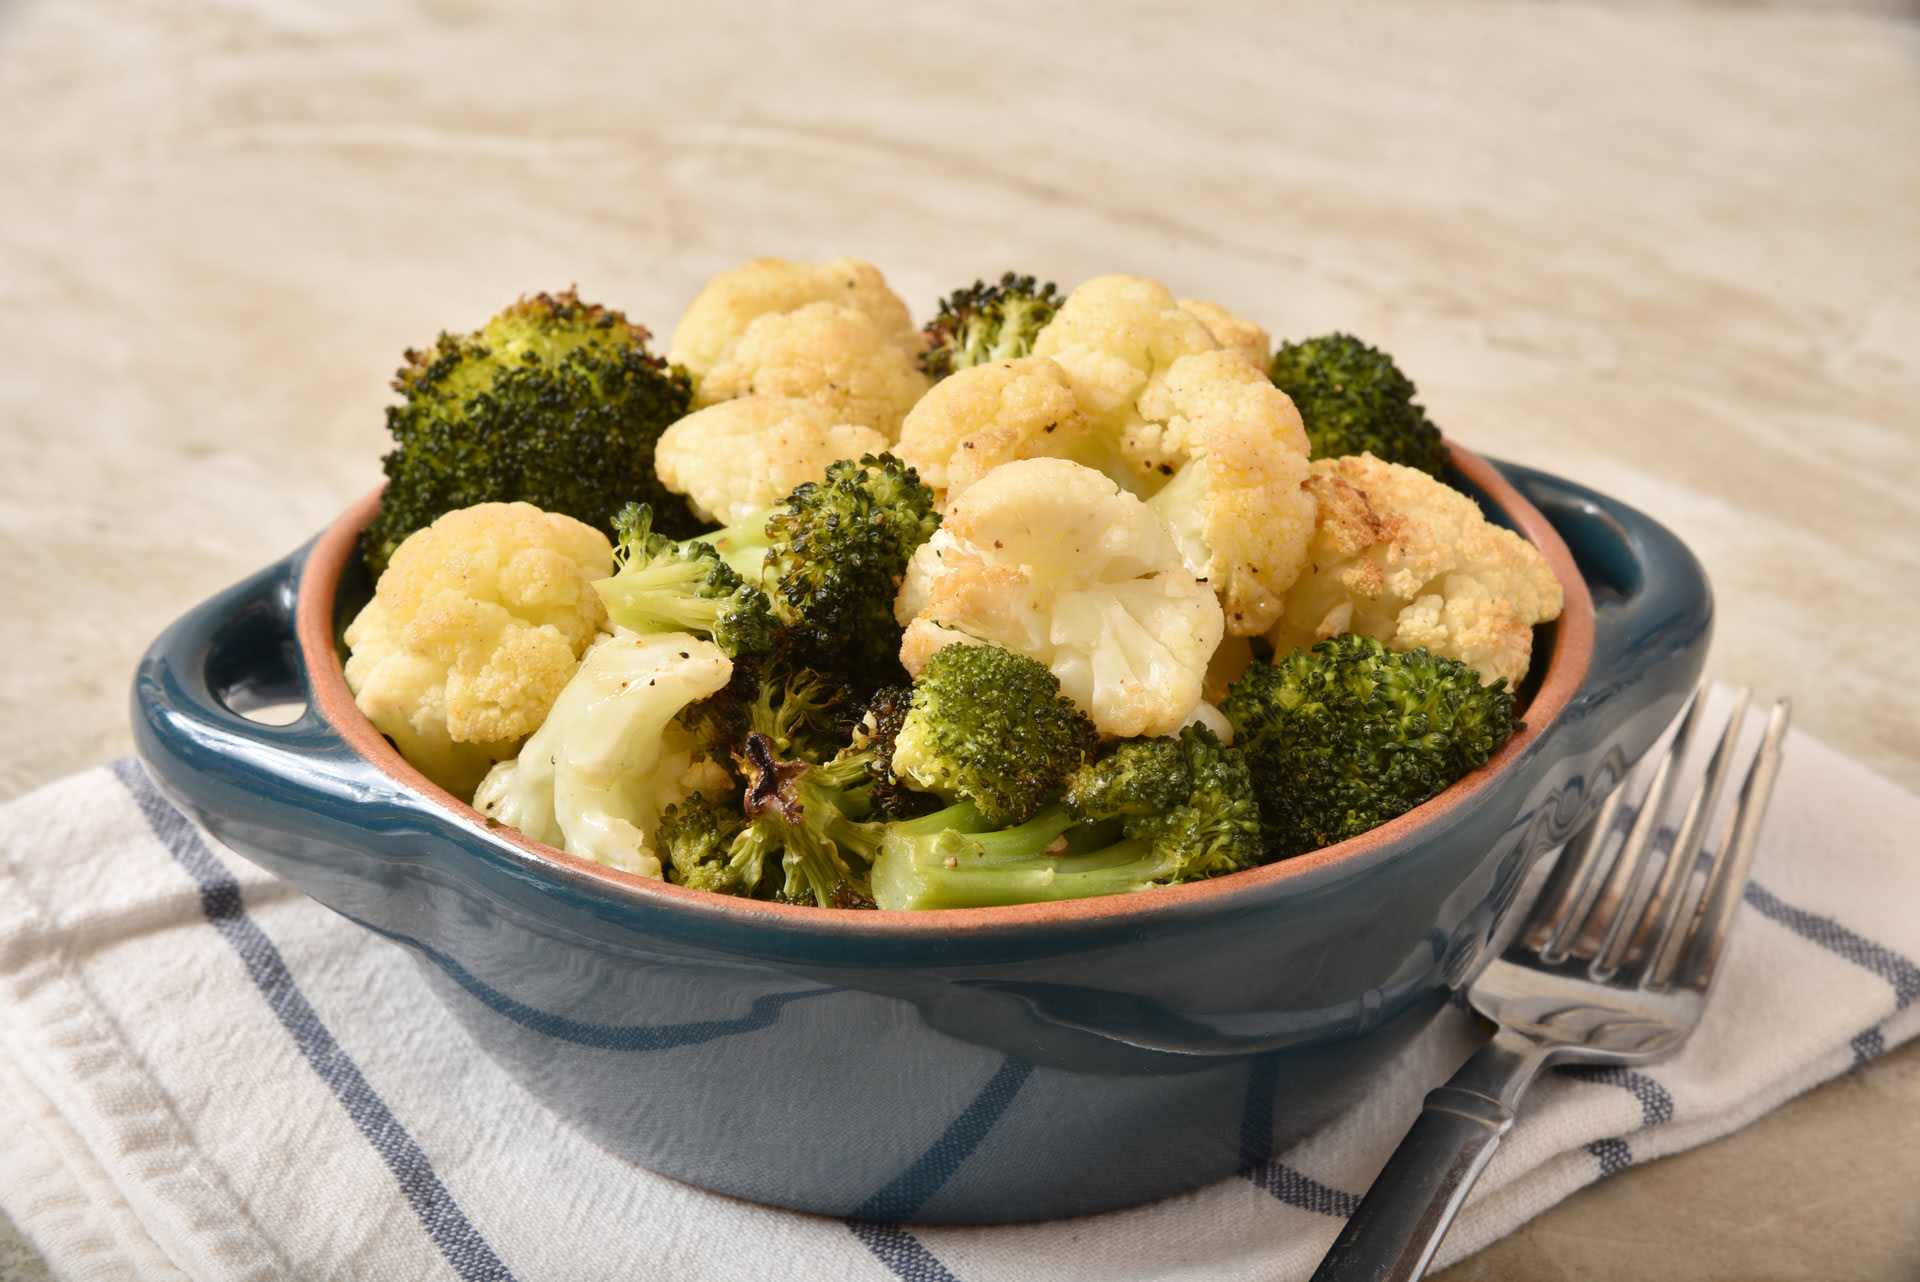 How To Store Cauliflower And Broccoli